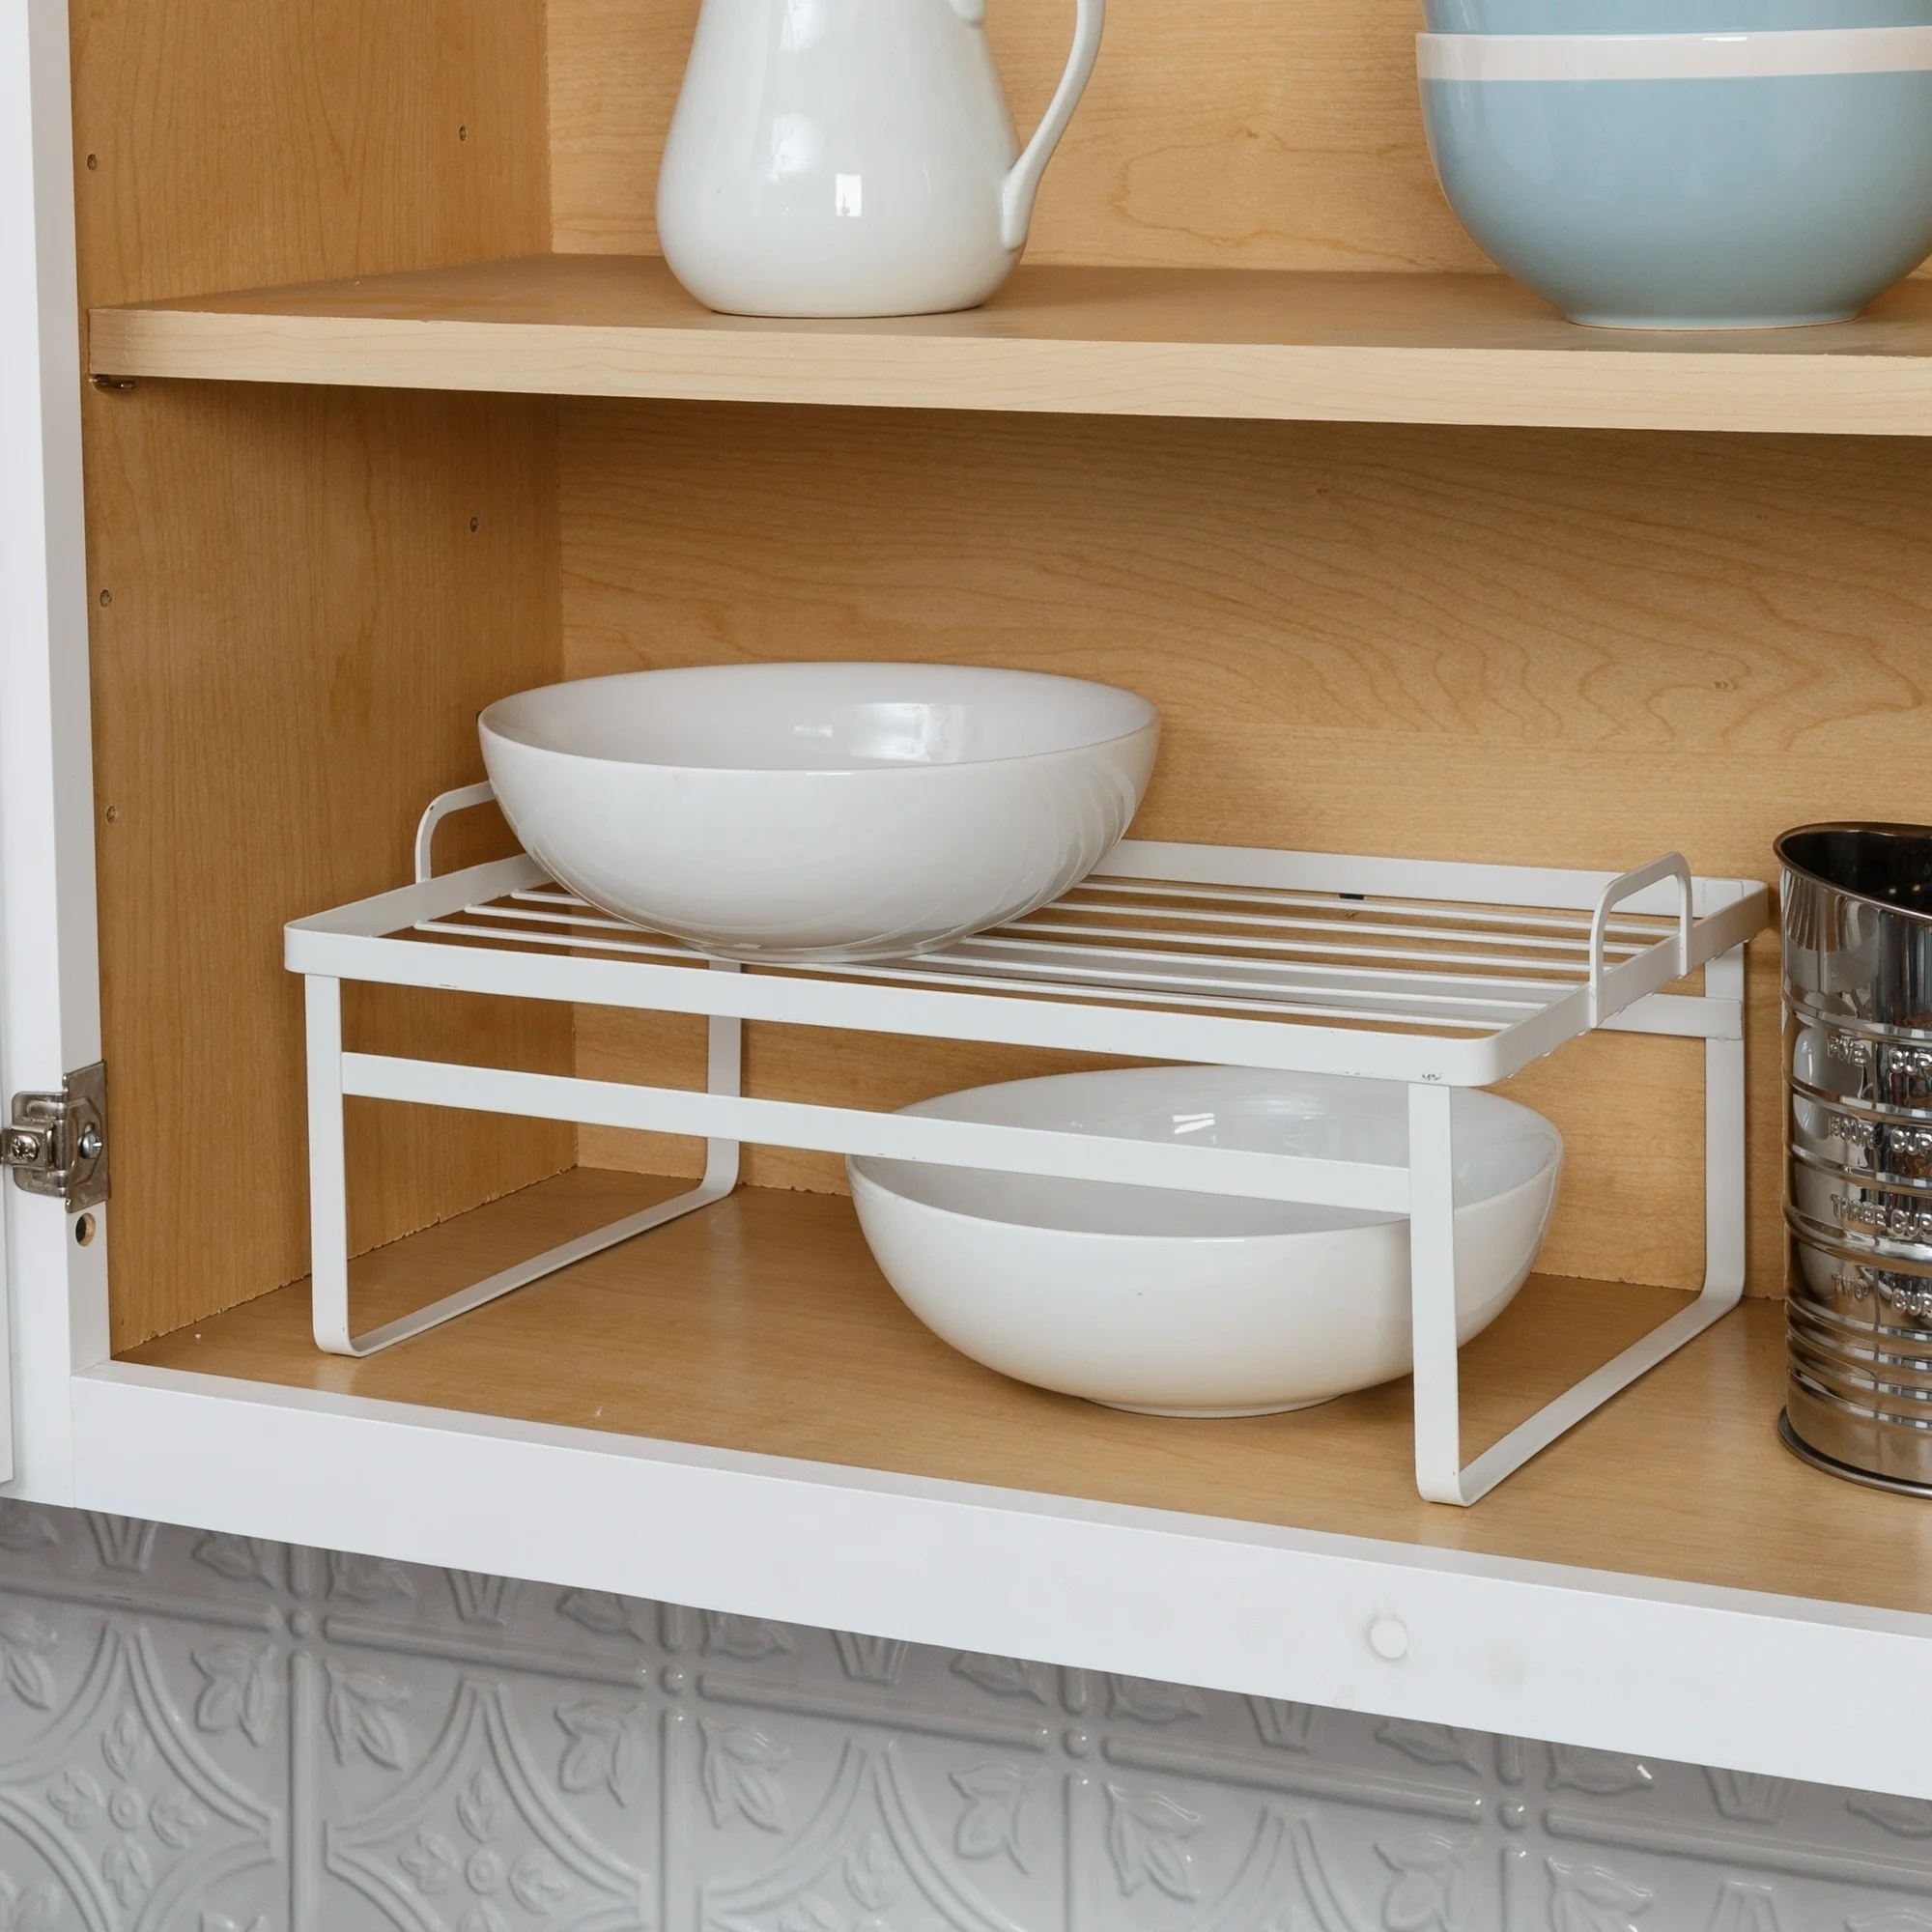 shelves in cabinet with bowls stacked above and below